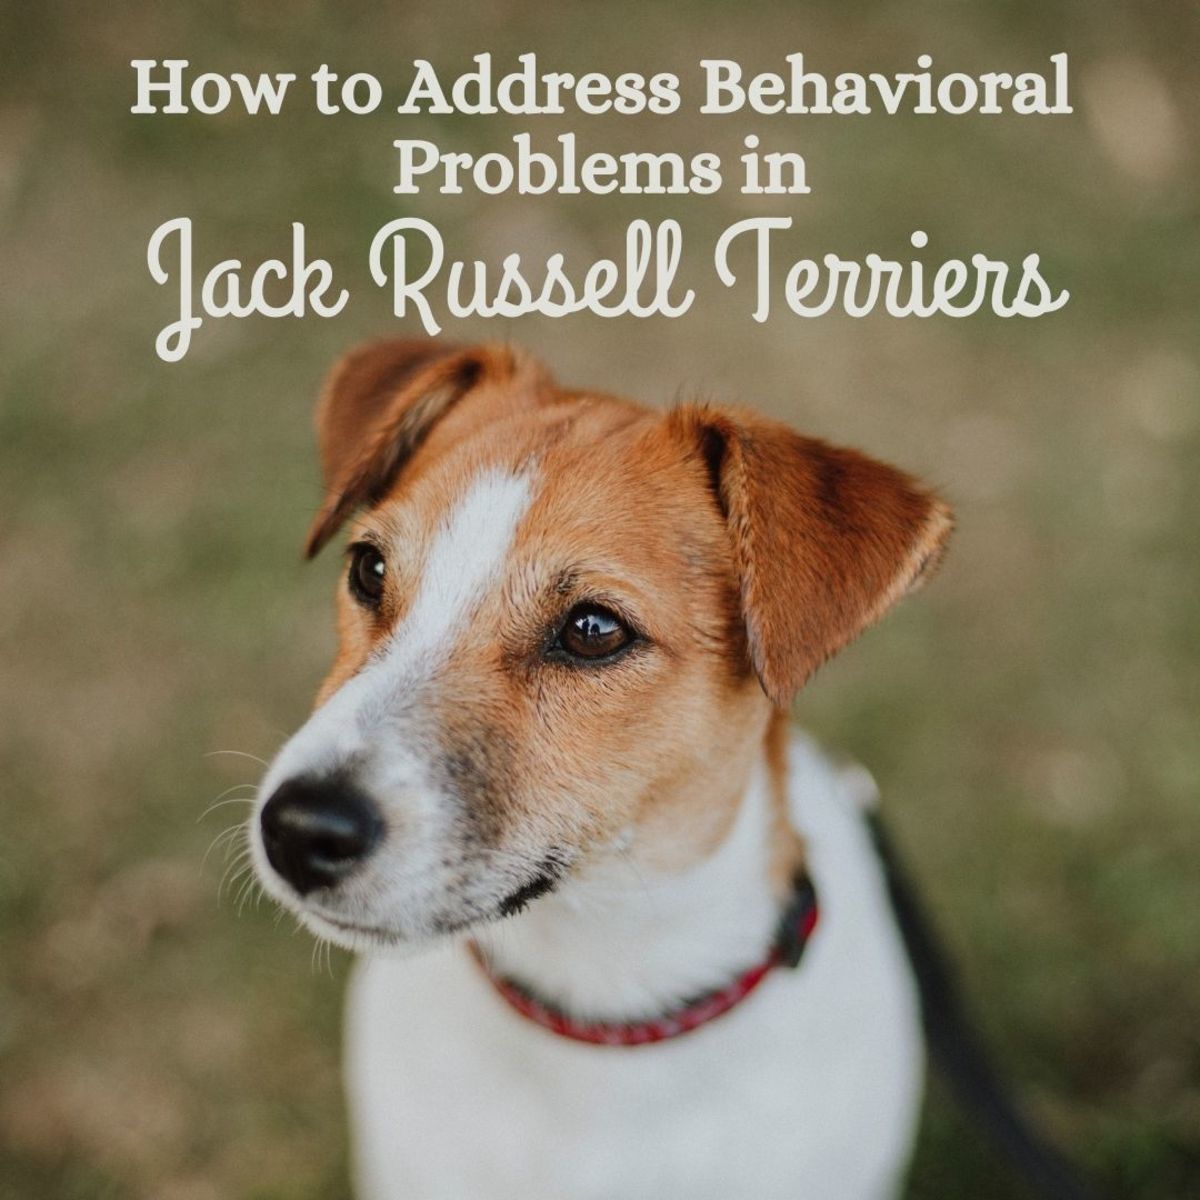 How to fix common Jack Russell Terrier behavioral issues.